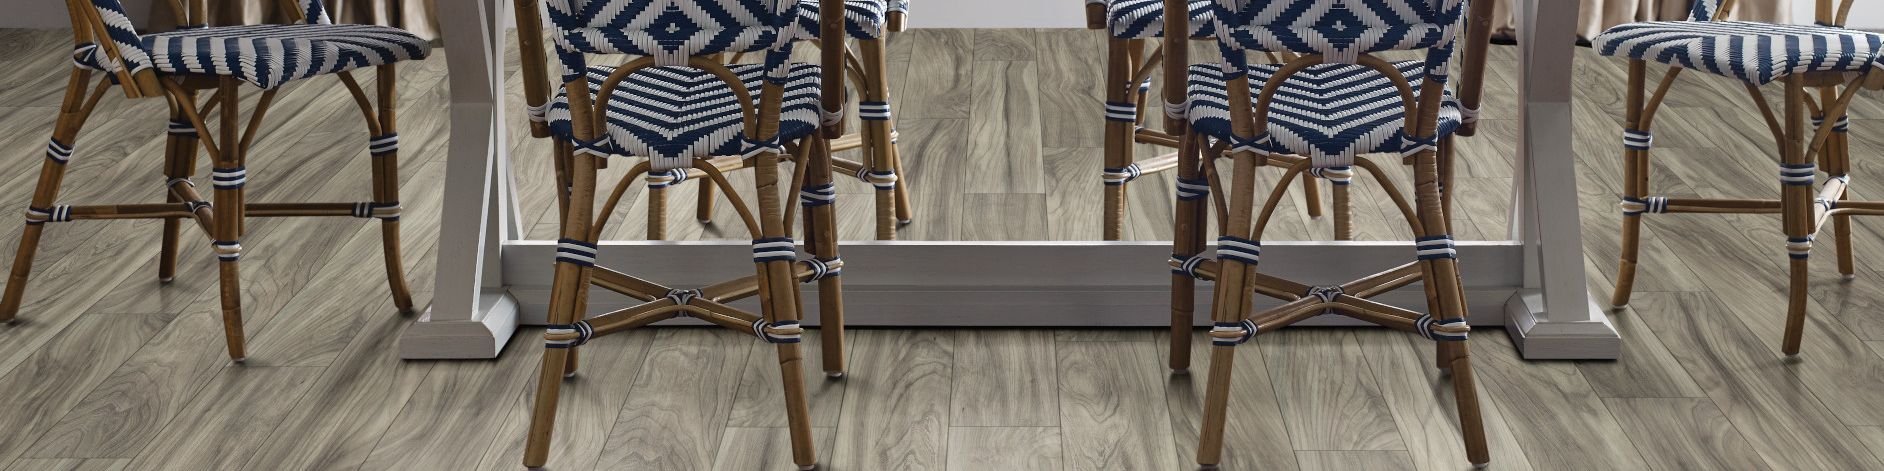 woven dining chairs around a dining table - Goodrich Floor Coverings Inc in Salt Lake City